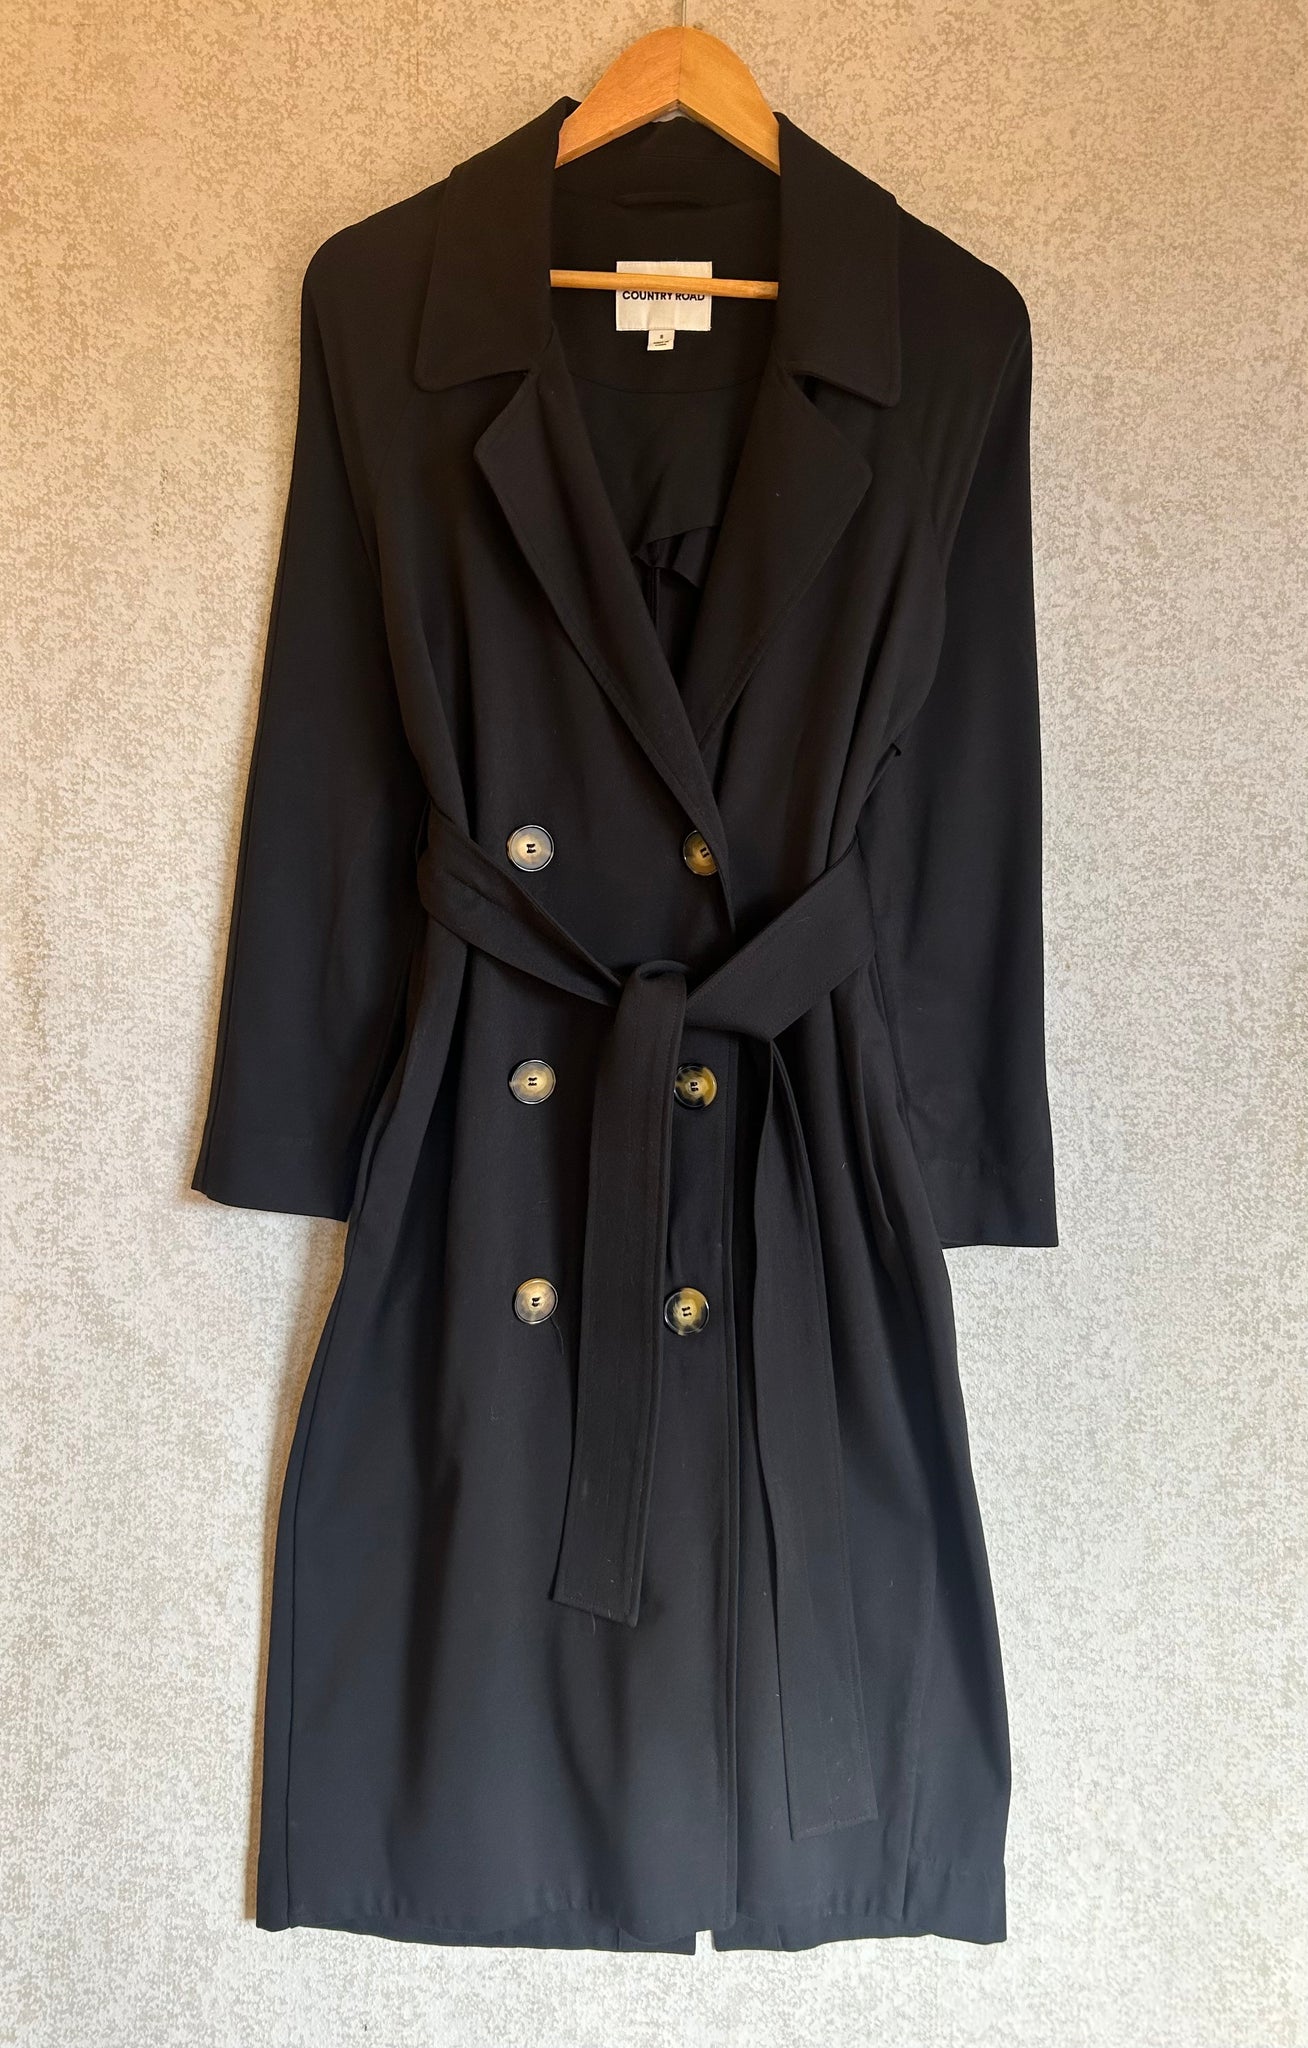 Country Road Trench Coat - Size 8